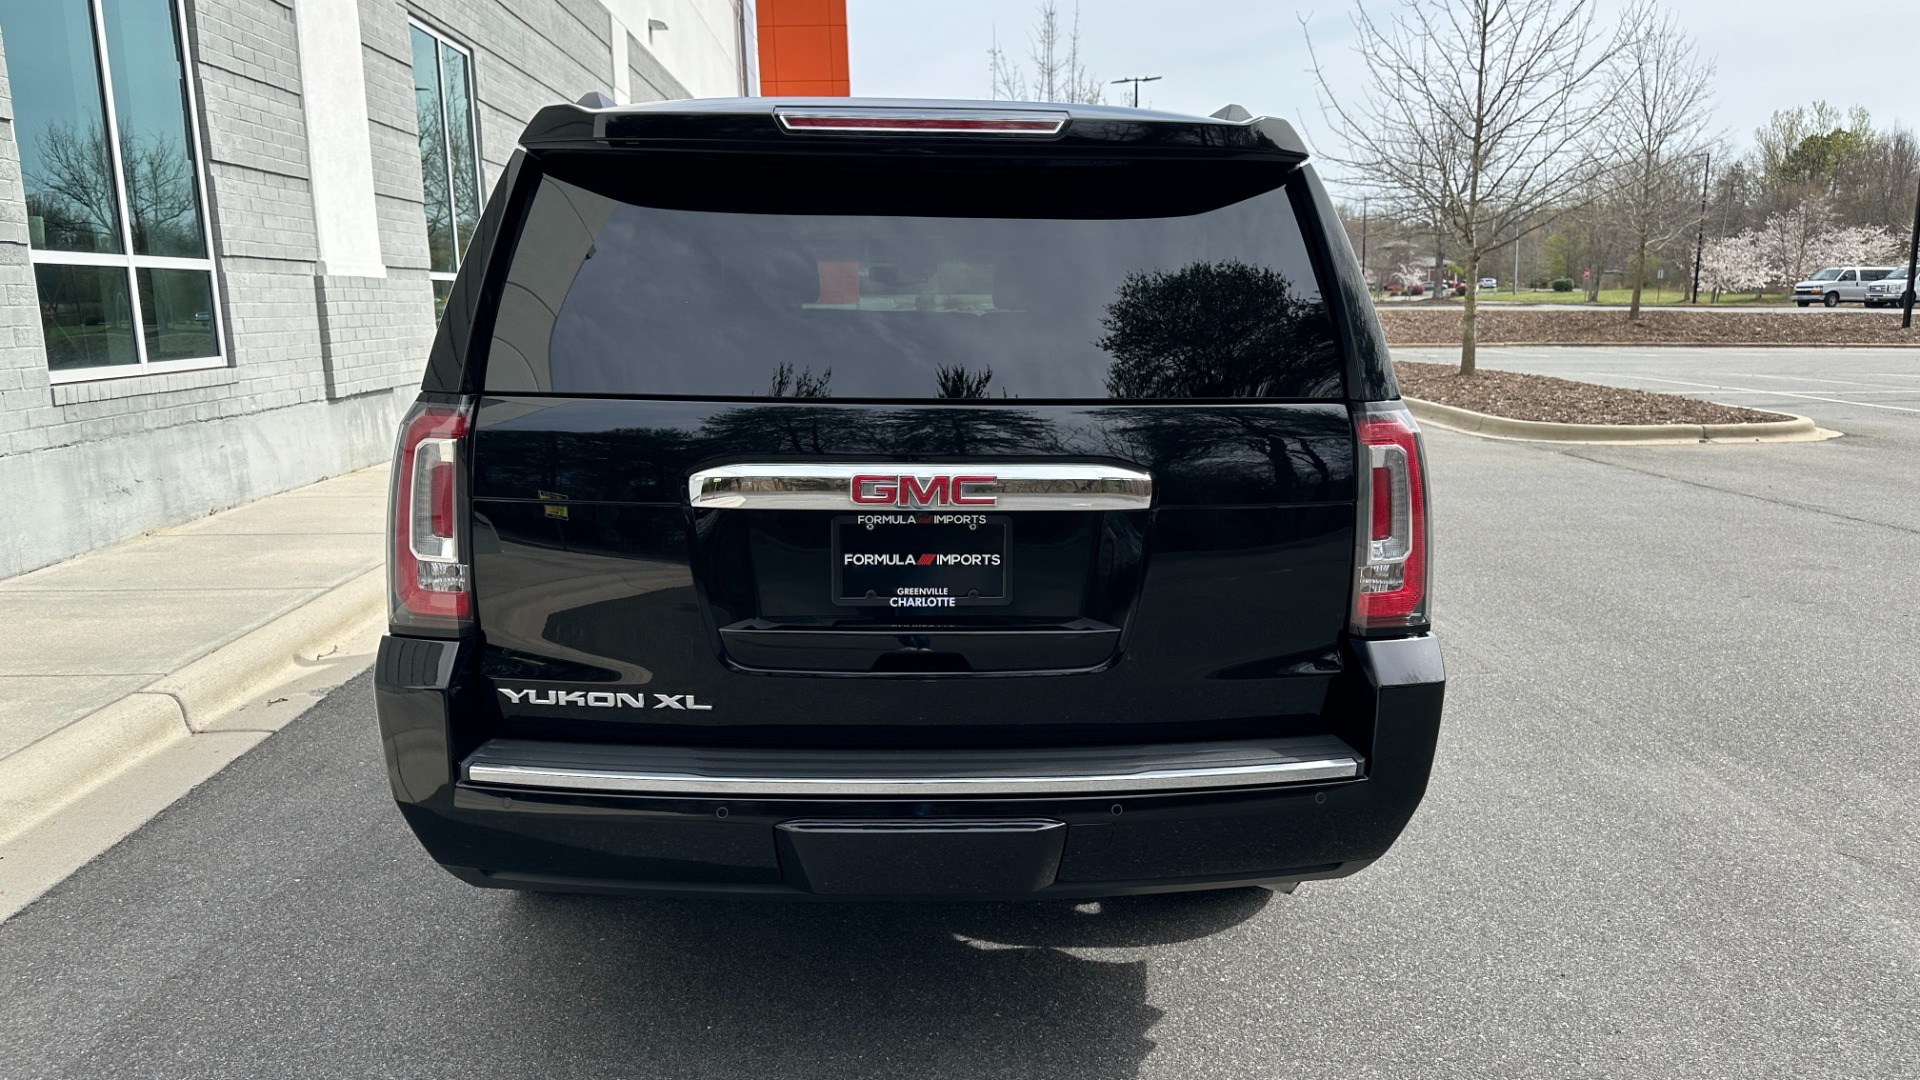 Used 2017 GMC Yukon XL DENALI / OPEN ROAD PACKAGE / 22IN WHEELS / REAR ENTERTAINMENT for sale Sold at Formula Imports in Charlotte NC 28227 9